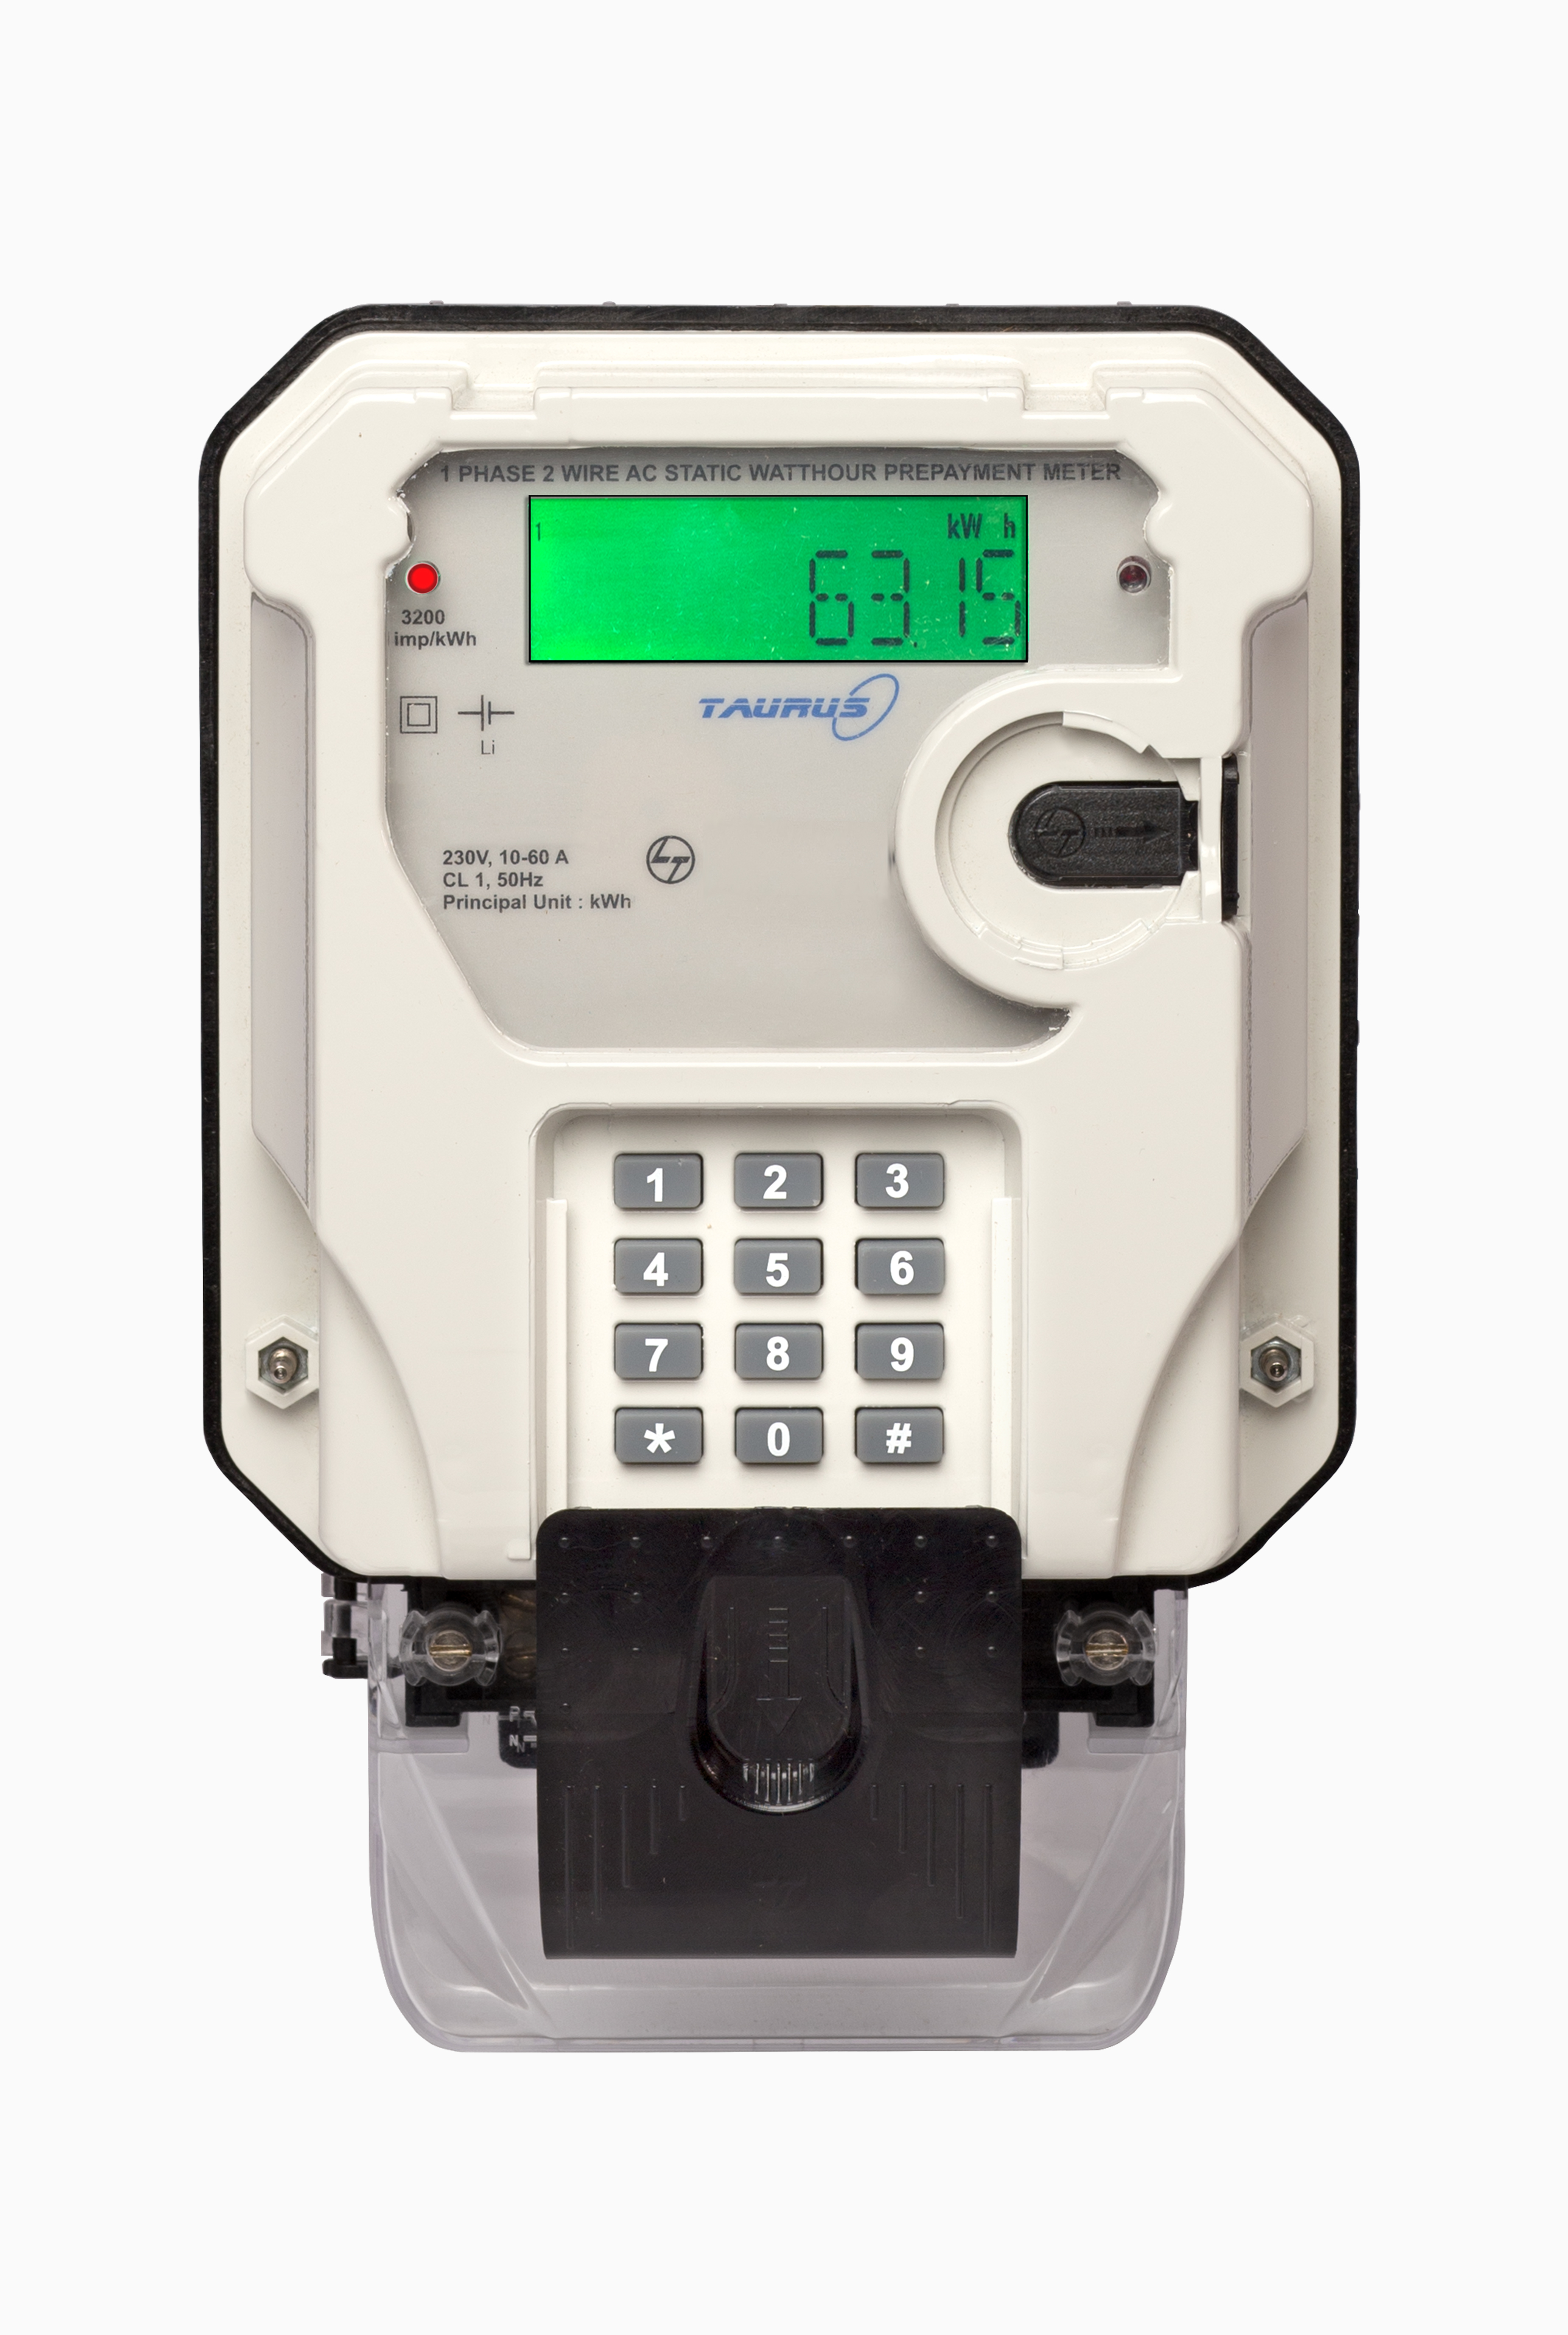 Landschap trog debat Single Phase Prepayment Meter | Residential & Commercial Meters | Meters |  Products | Products & Services | Electrical & Automation